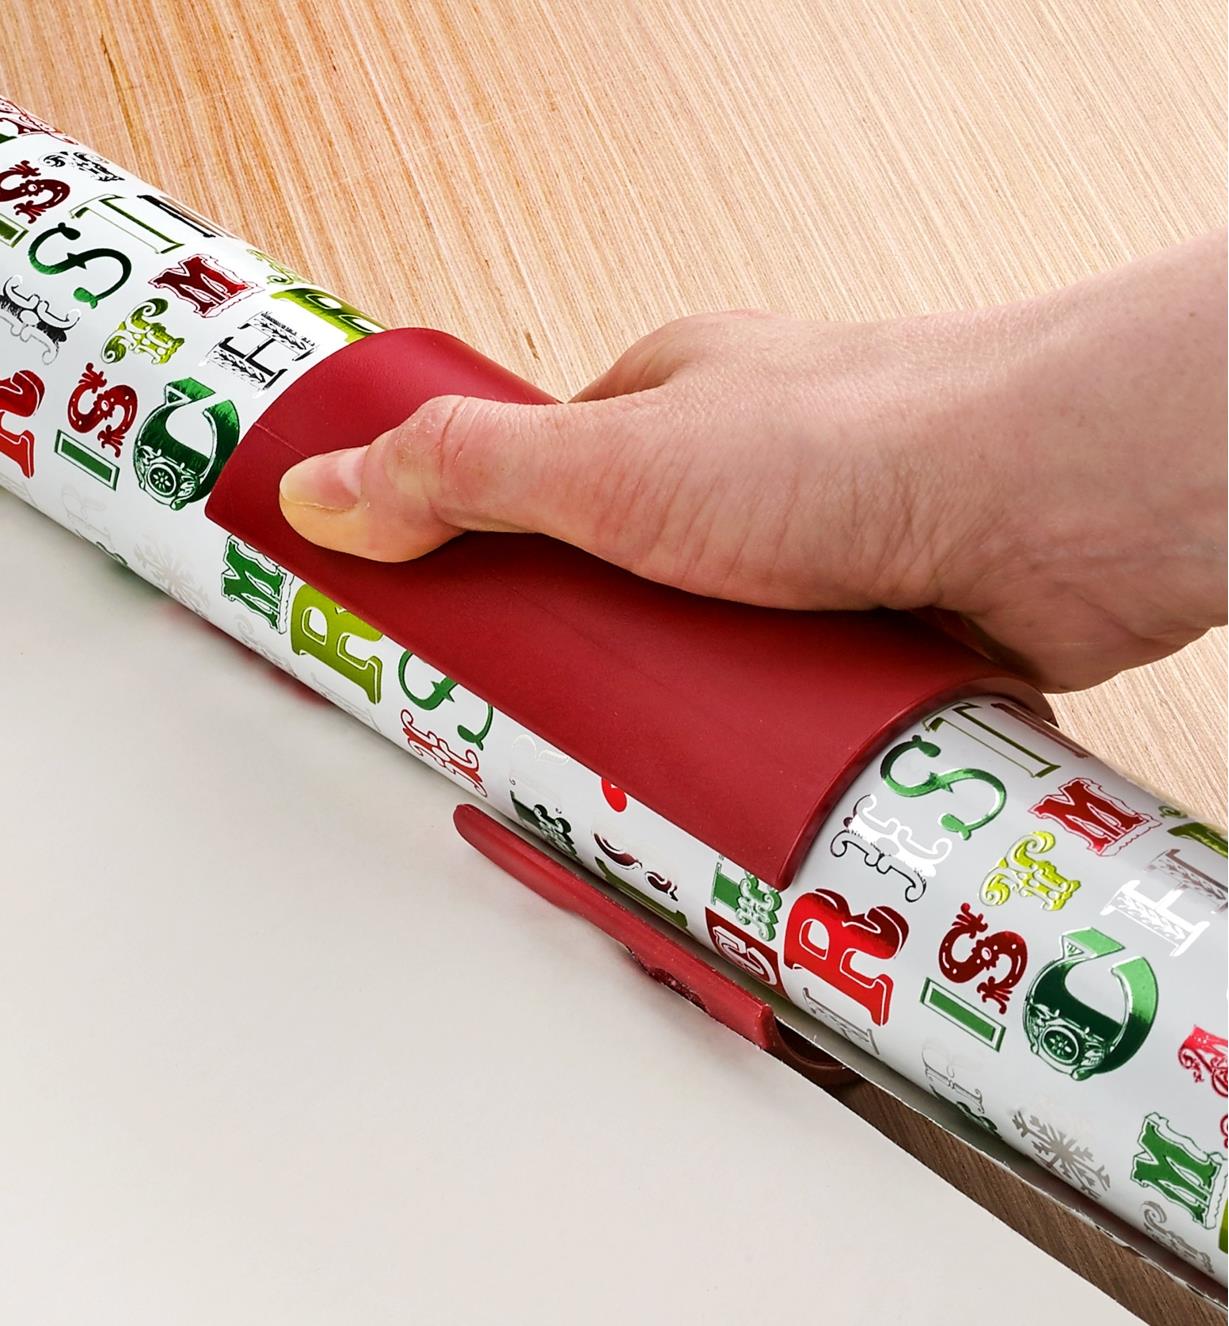 The sliding gift-wrap cutter being used to slice a piece of gift wrap neatly from the roll